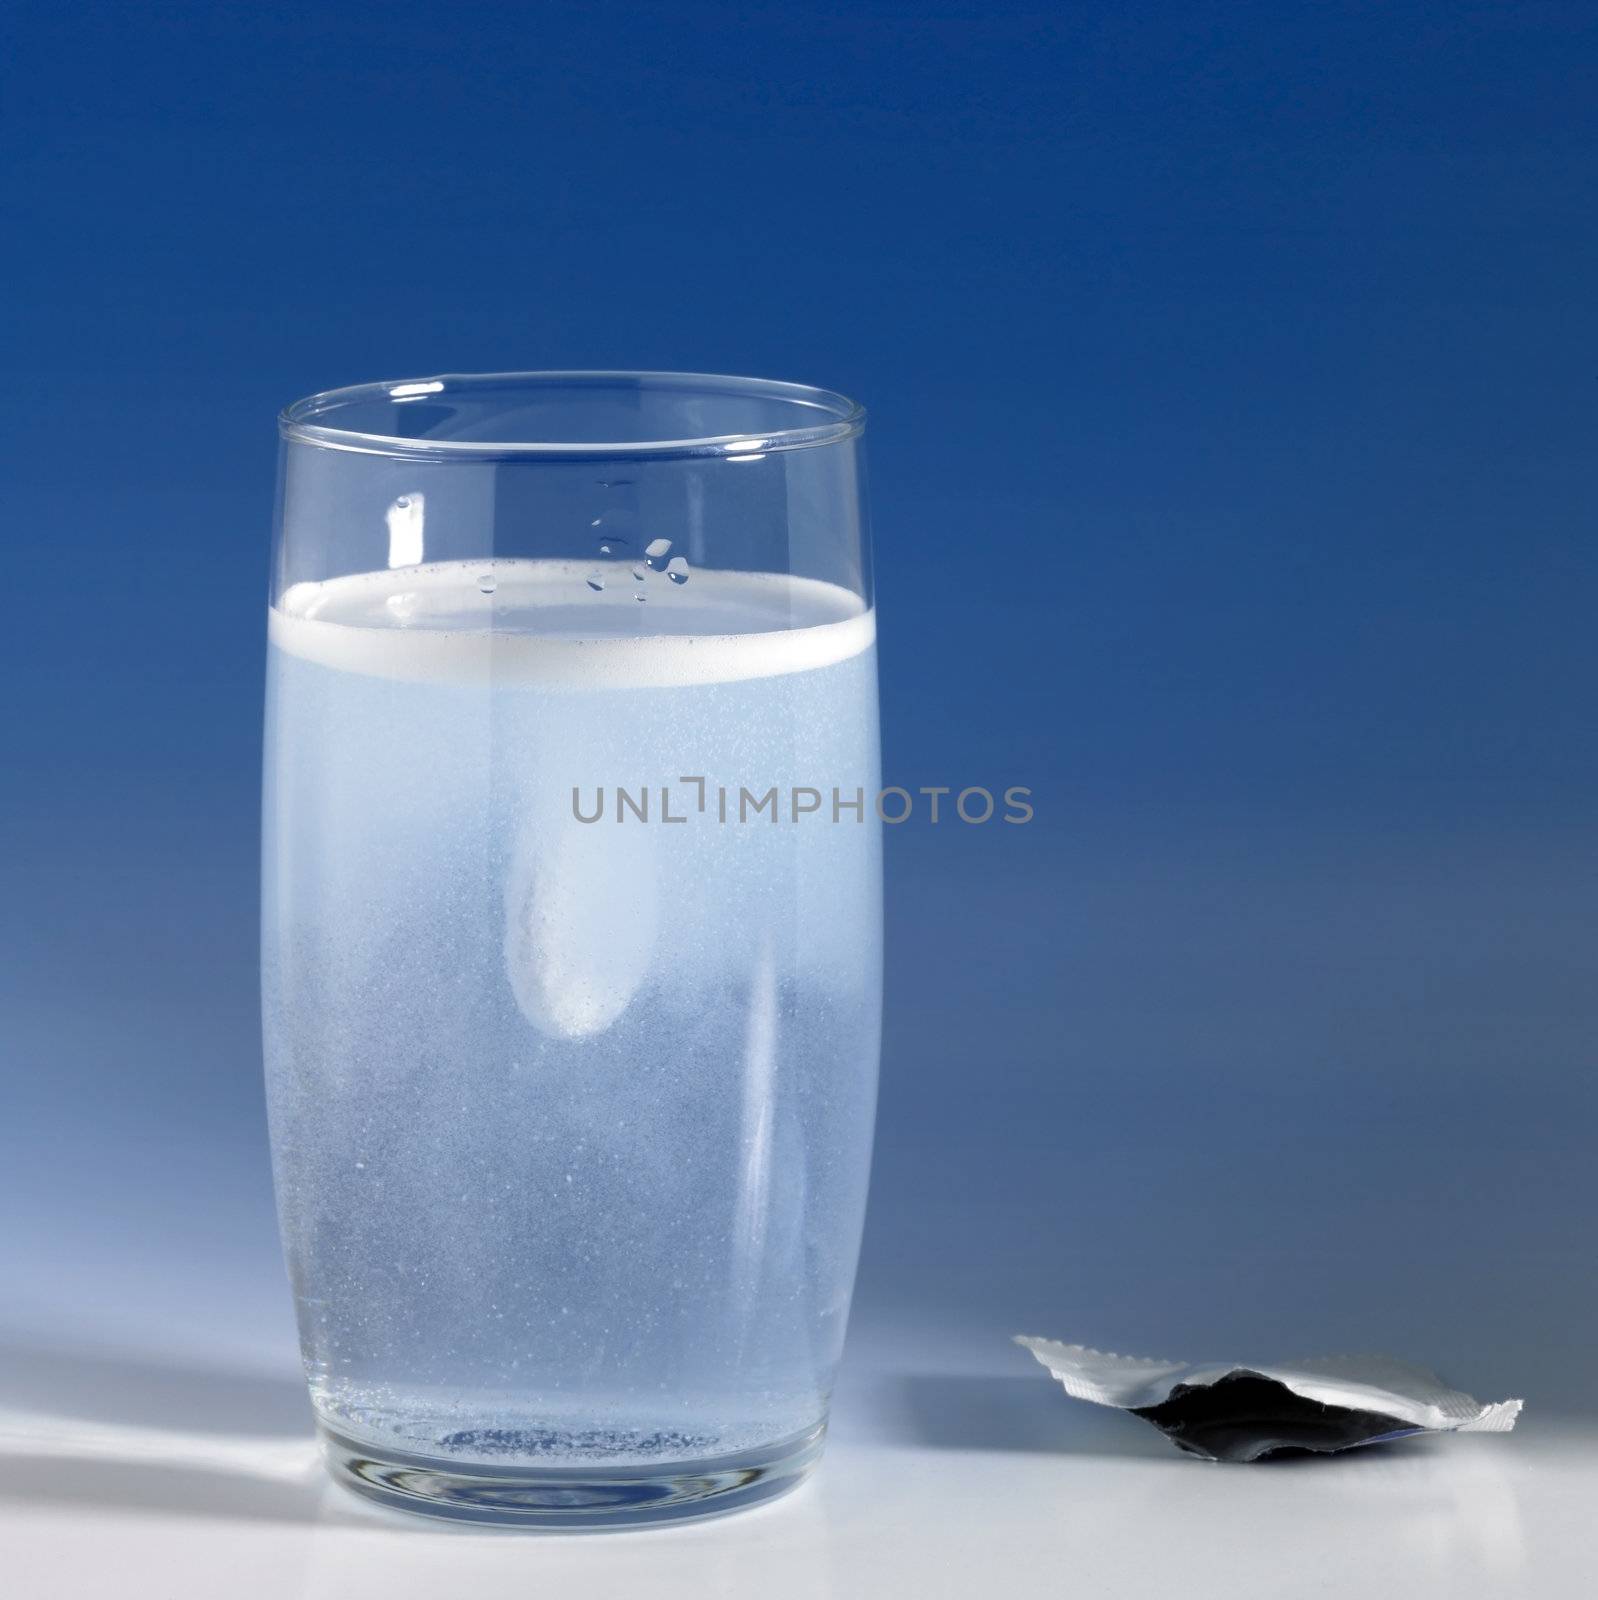 dissolving fizzy tablet in a glass of water. Studio photography in blue gradient back